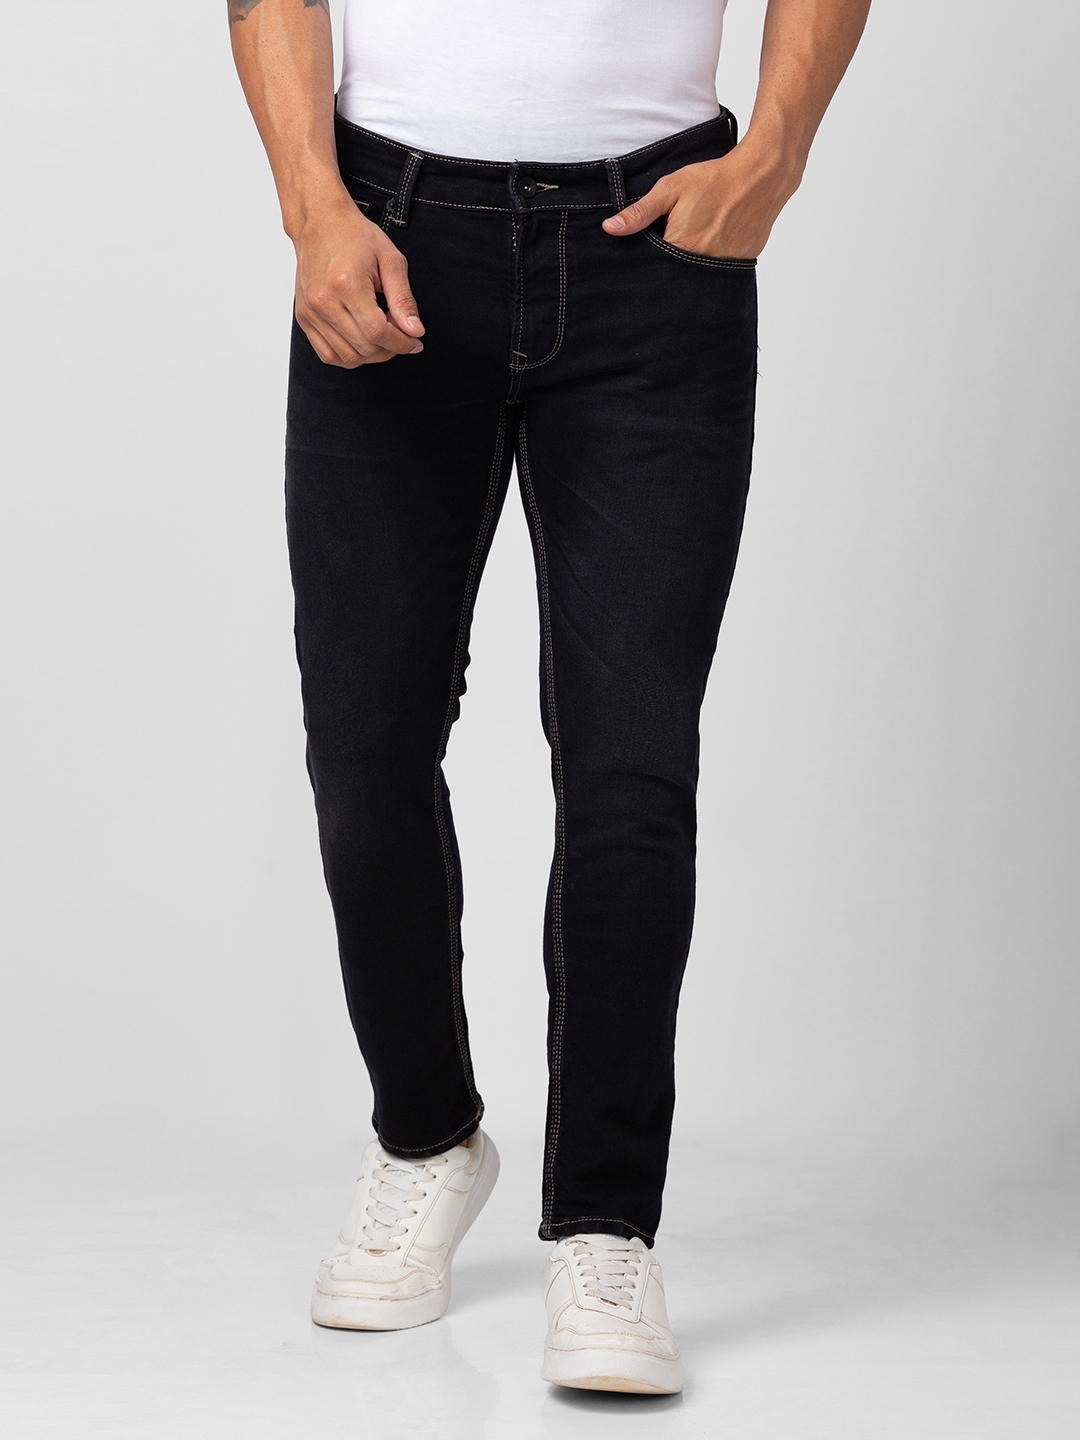 Spykar - Shop Jeans and Casual wear for men and women in India